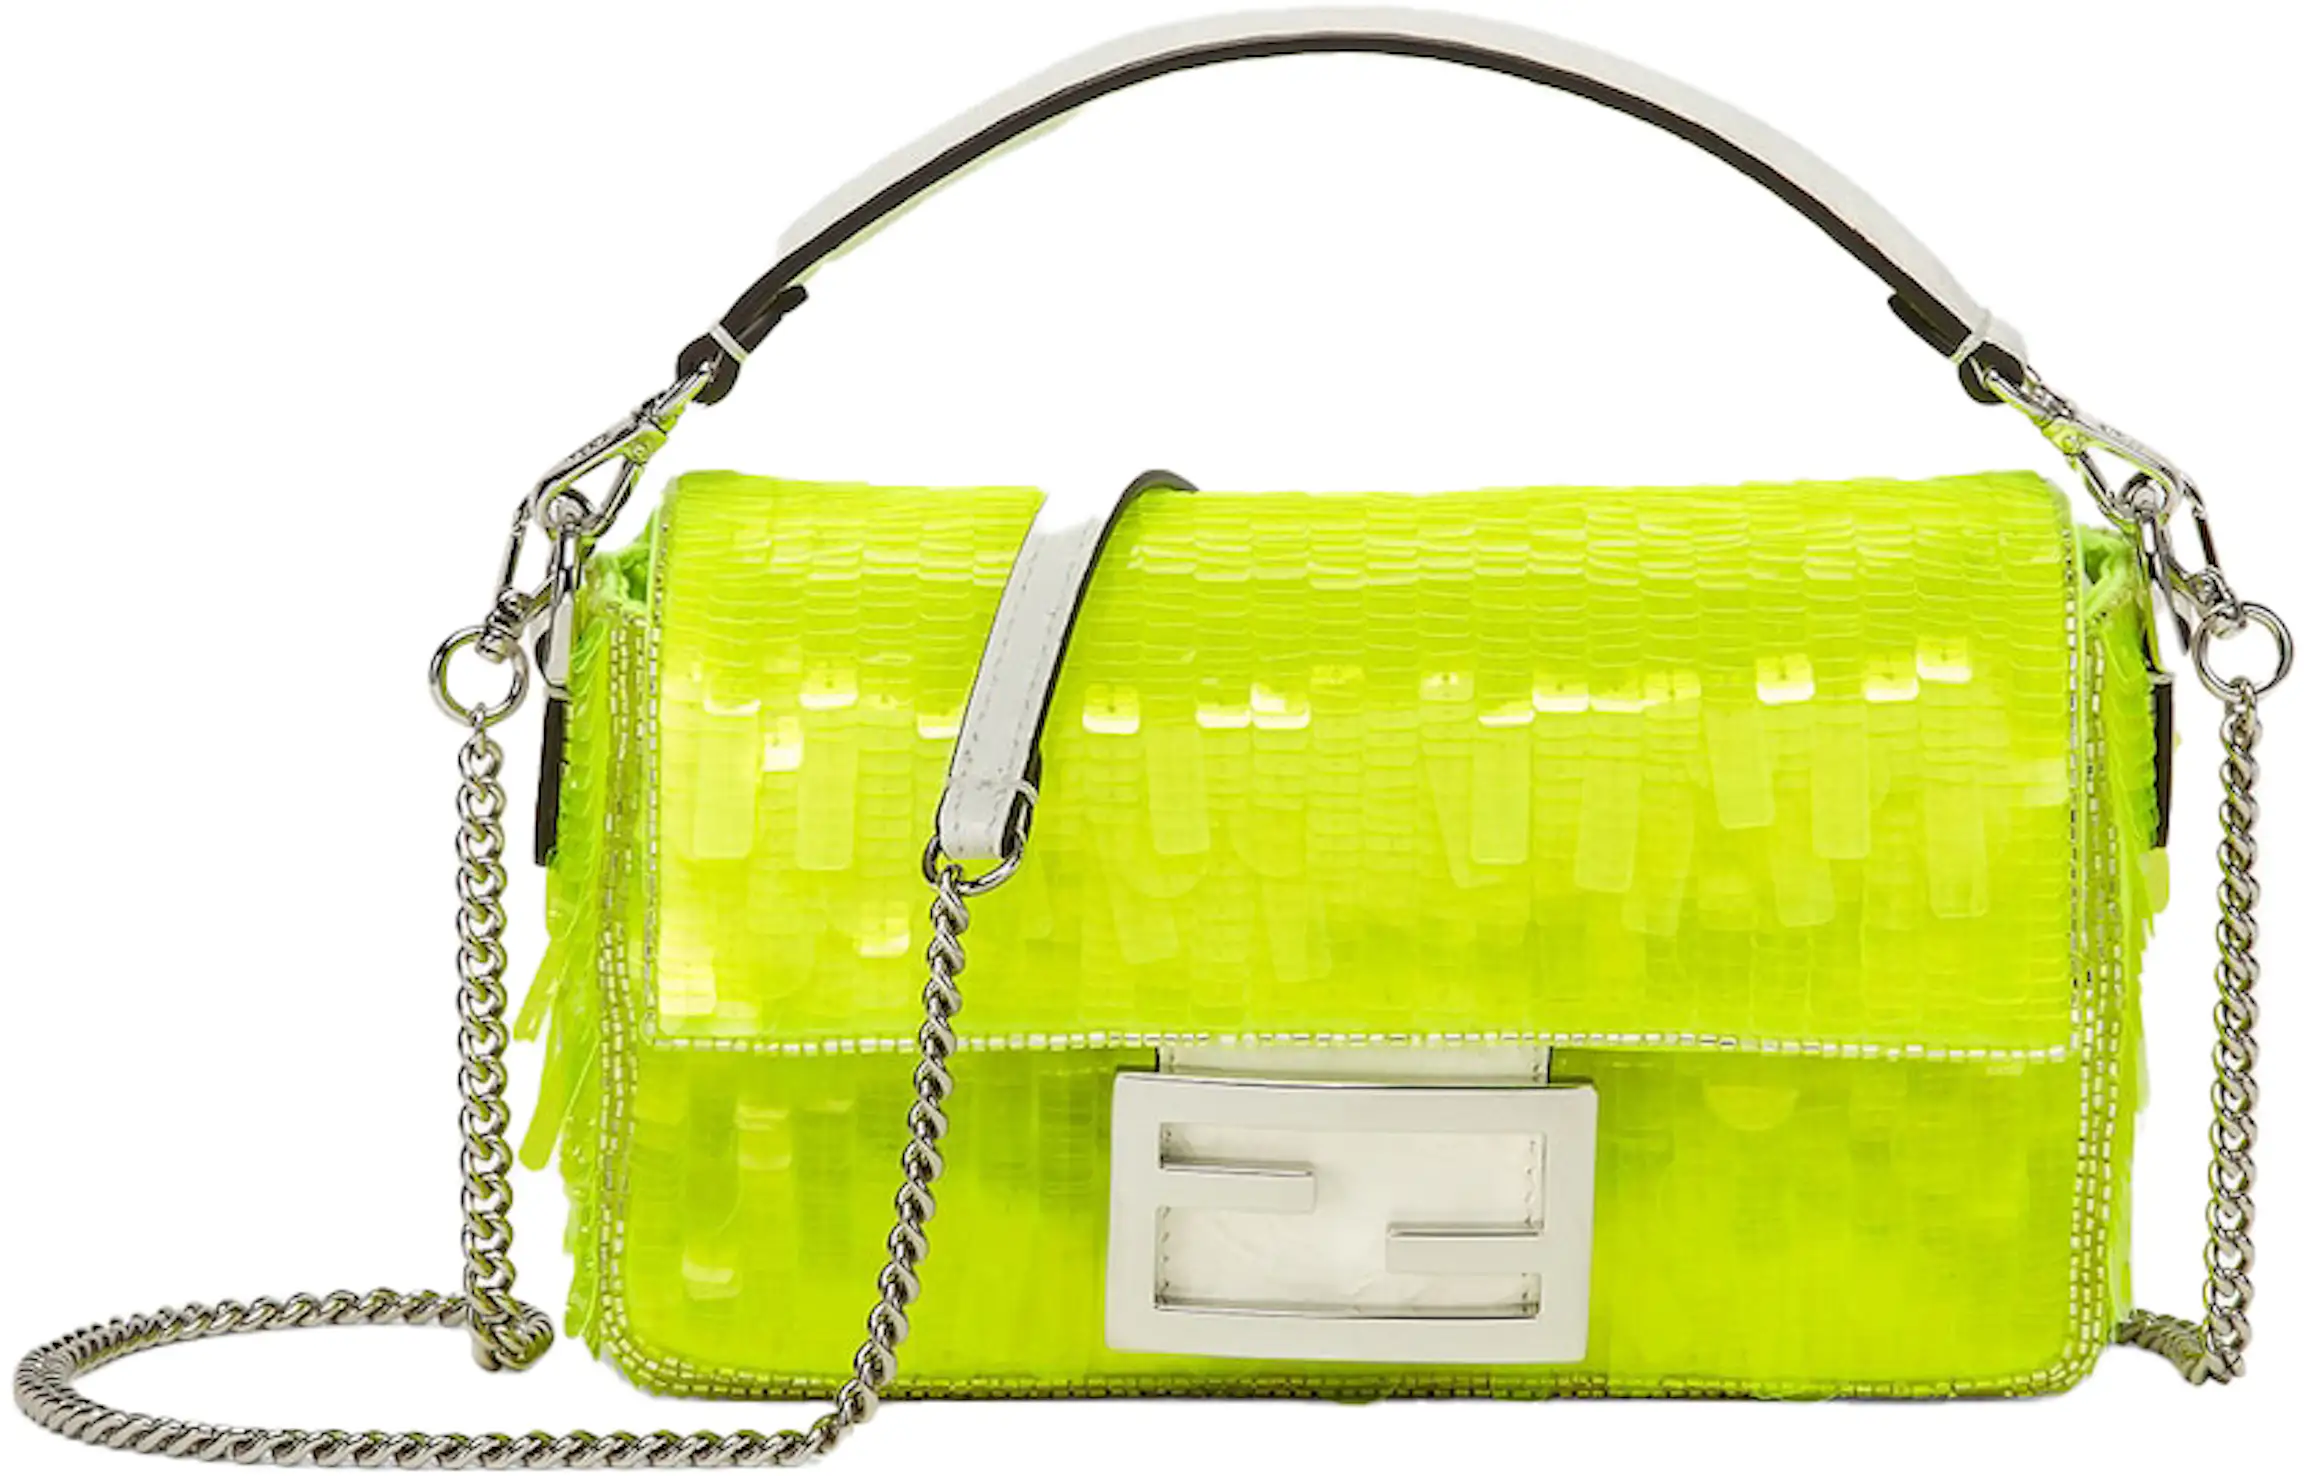 Fendi by Marc Jacobs Baguette Mini Elaphe and Neon Yellow Sequin Bag in ...